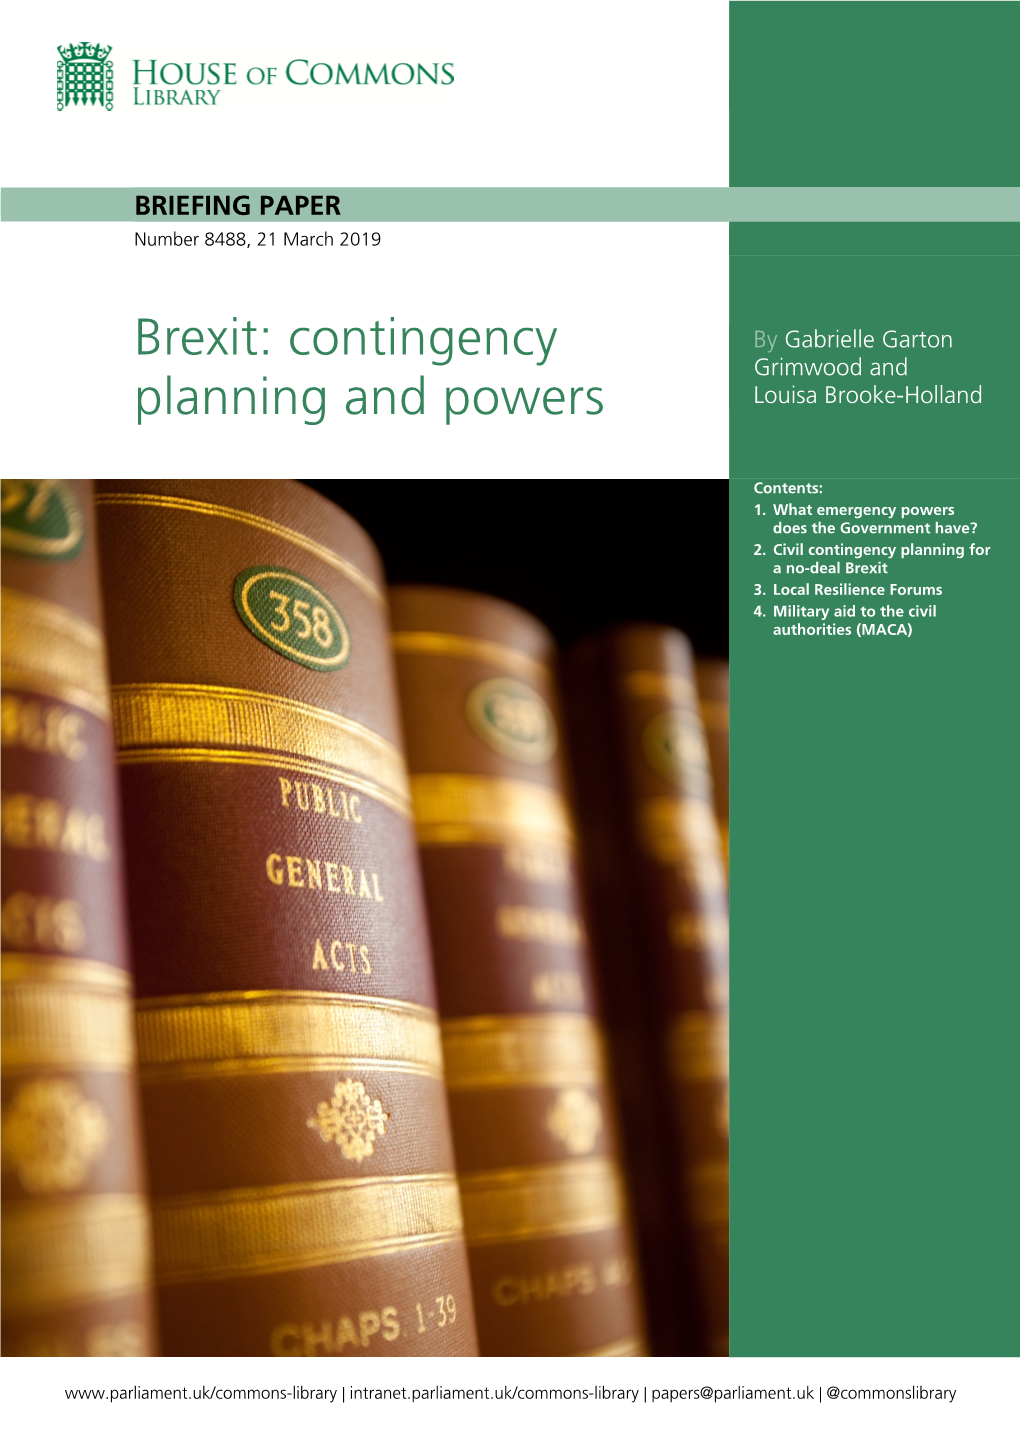 Brexit: Contingency Planning and Powers